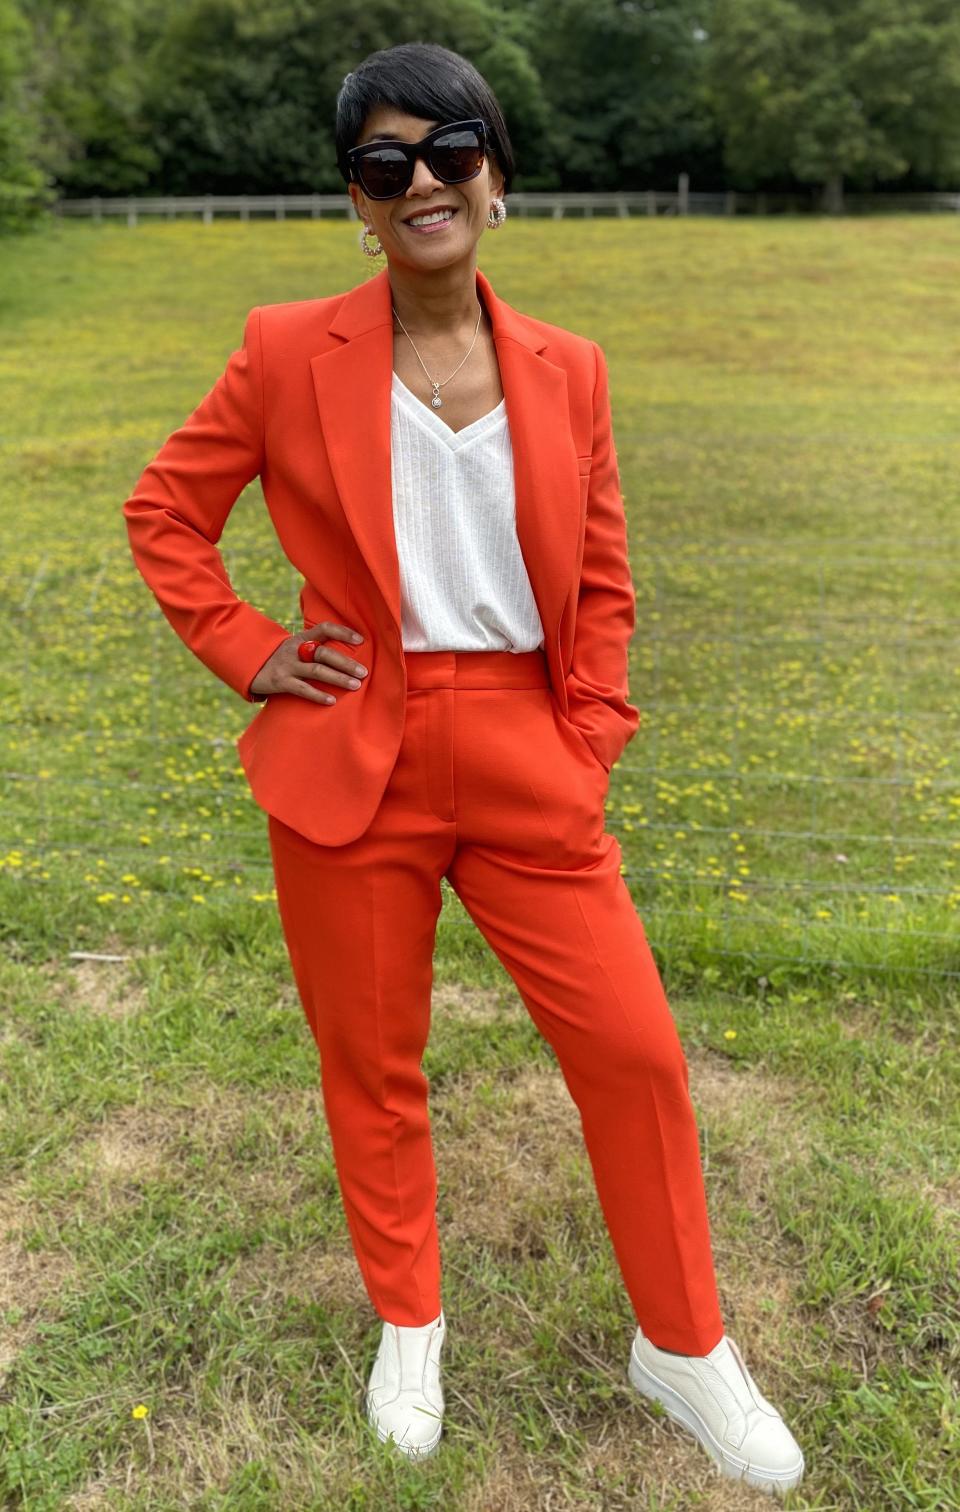 Chantelle Znideric found this second-hand French Connection suit on the app Vinted, for only £15 – it would have been approx. £180 new. (Supplied)